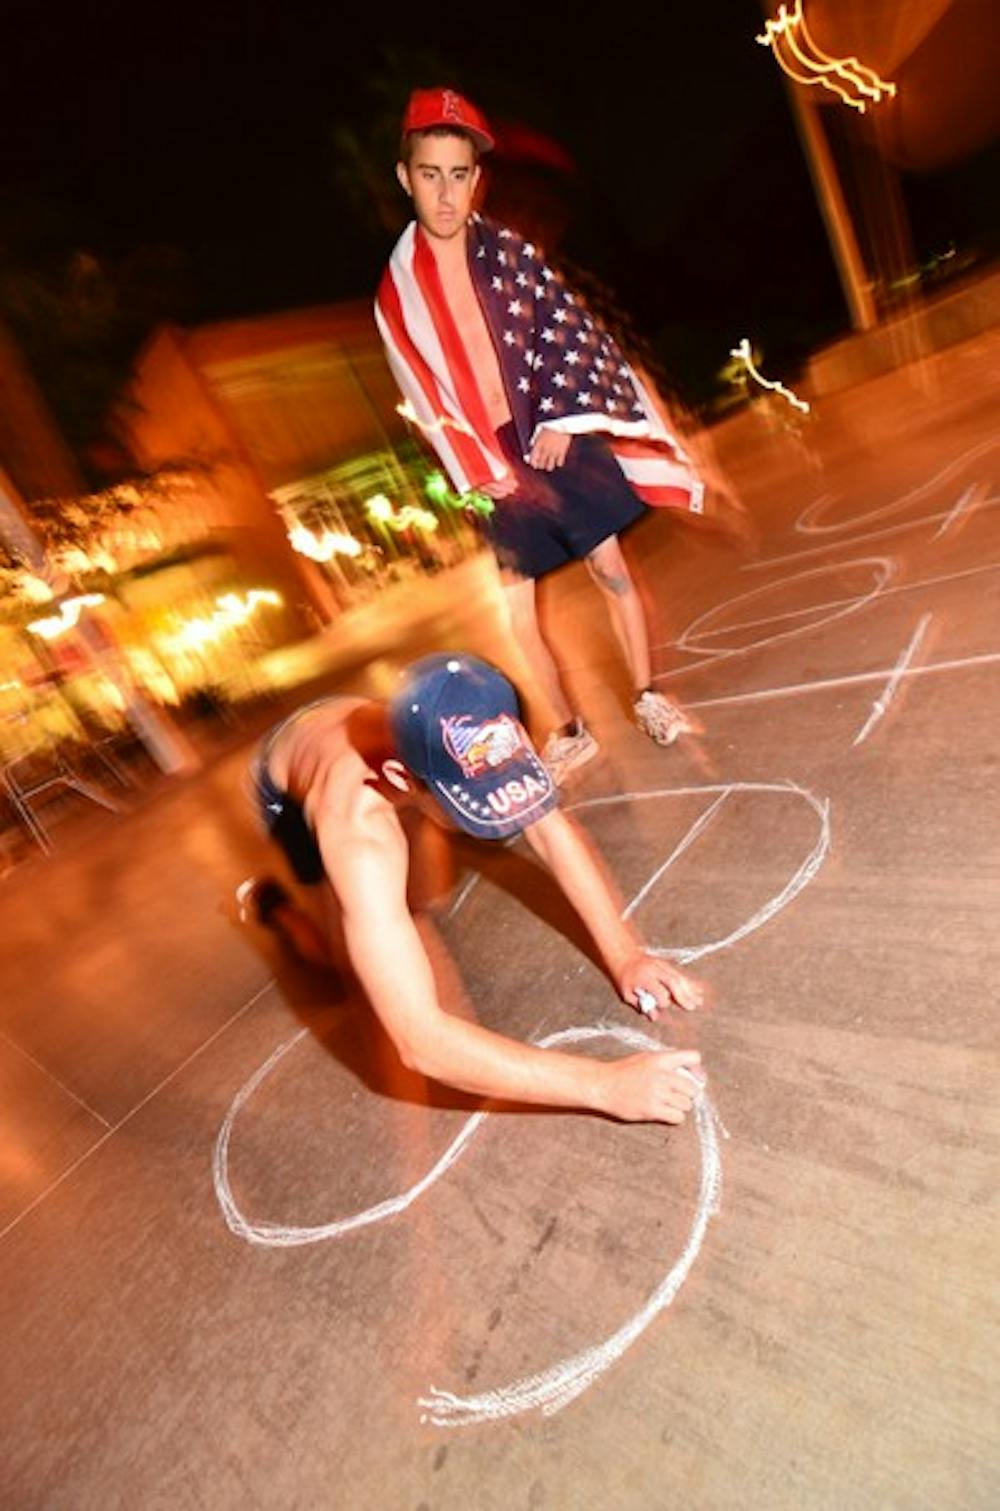 GOT HIM: Aeronautical management sophomore James White (right) and political science sophomore Steven Pizzi write patriotic slogans with chalk outside of the Memorial Union on Sunday night after hearing that the leader of al-Qaida, Osama bin Laden, was killed during a raid by the Navy Seals. (Photo by Aaron Lavinsky)